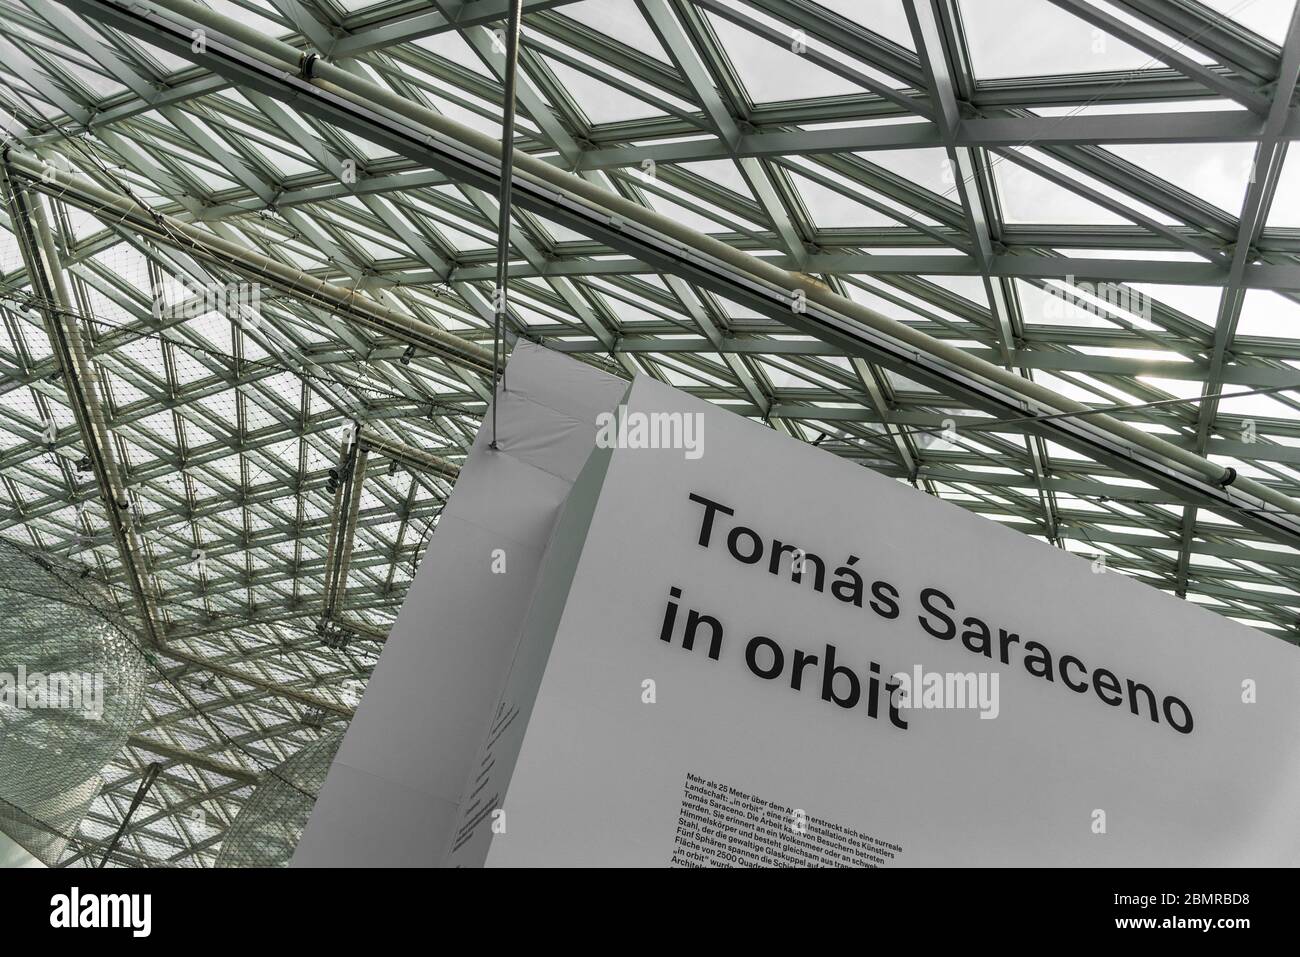 Dusseldorf, Germany - August 13, 2019: Inside K21 museum and In Orbit exhibition Stock Photo